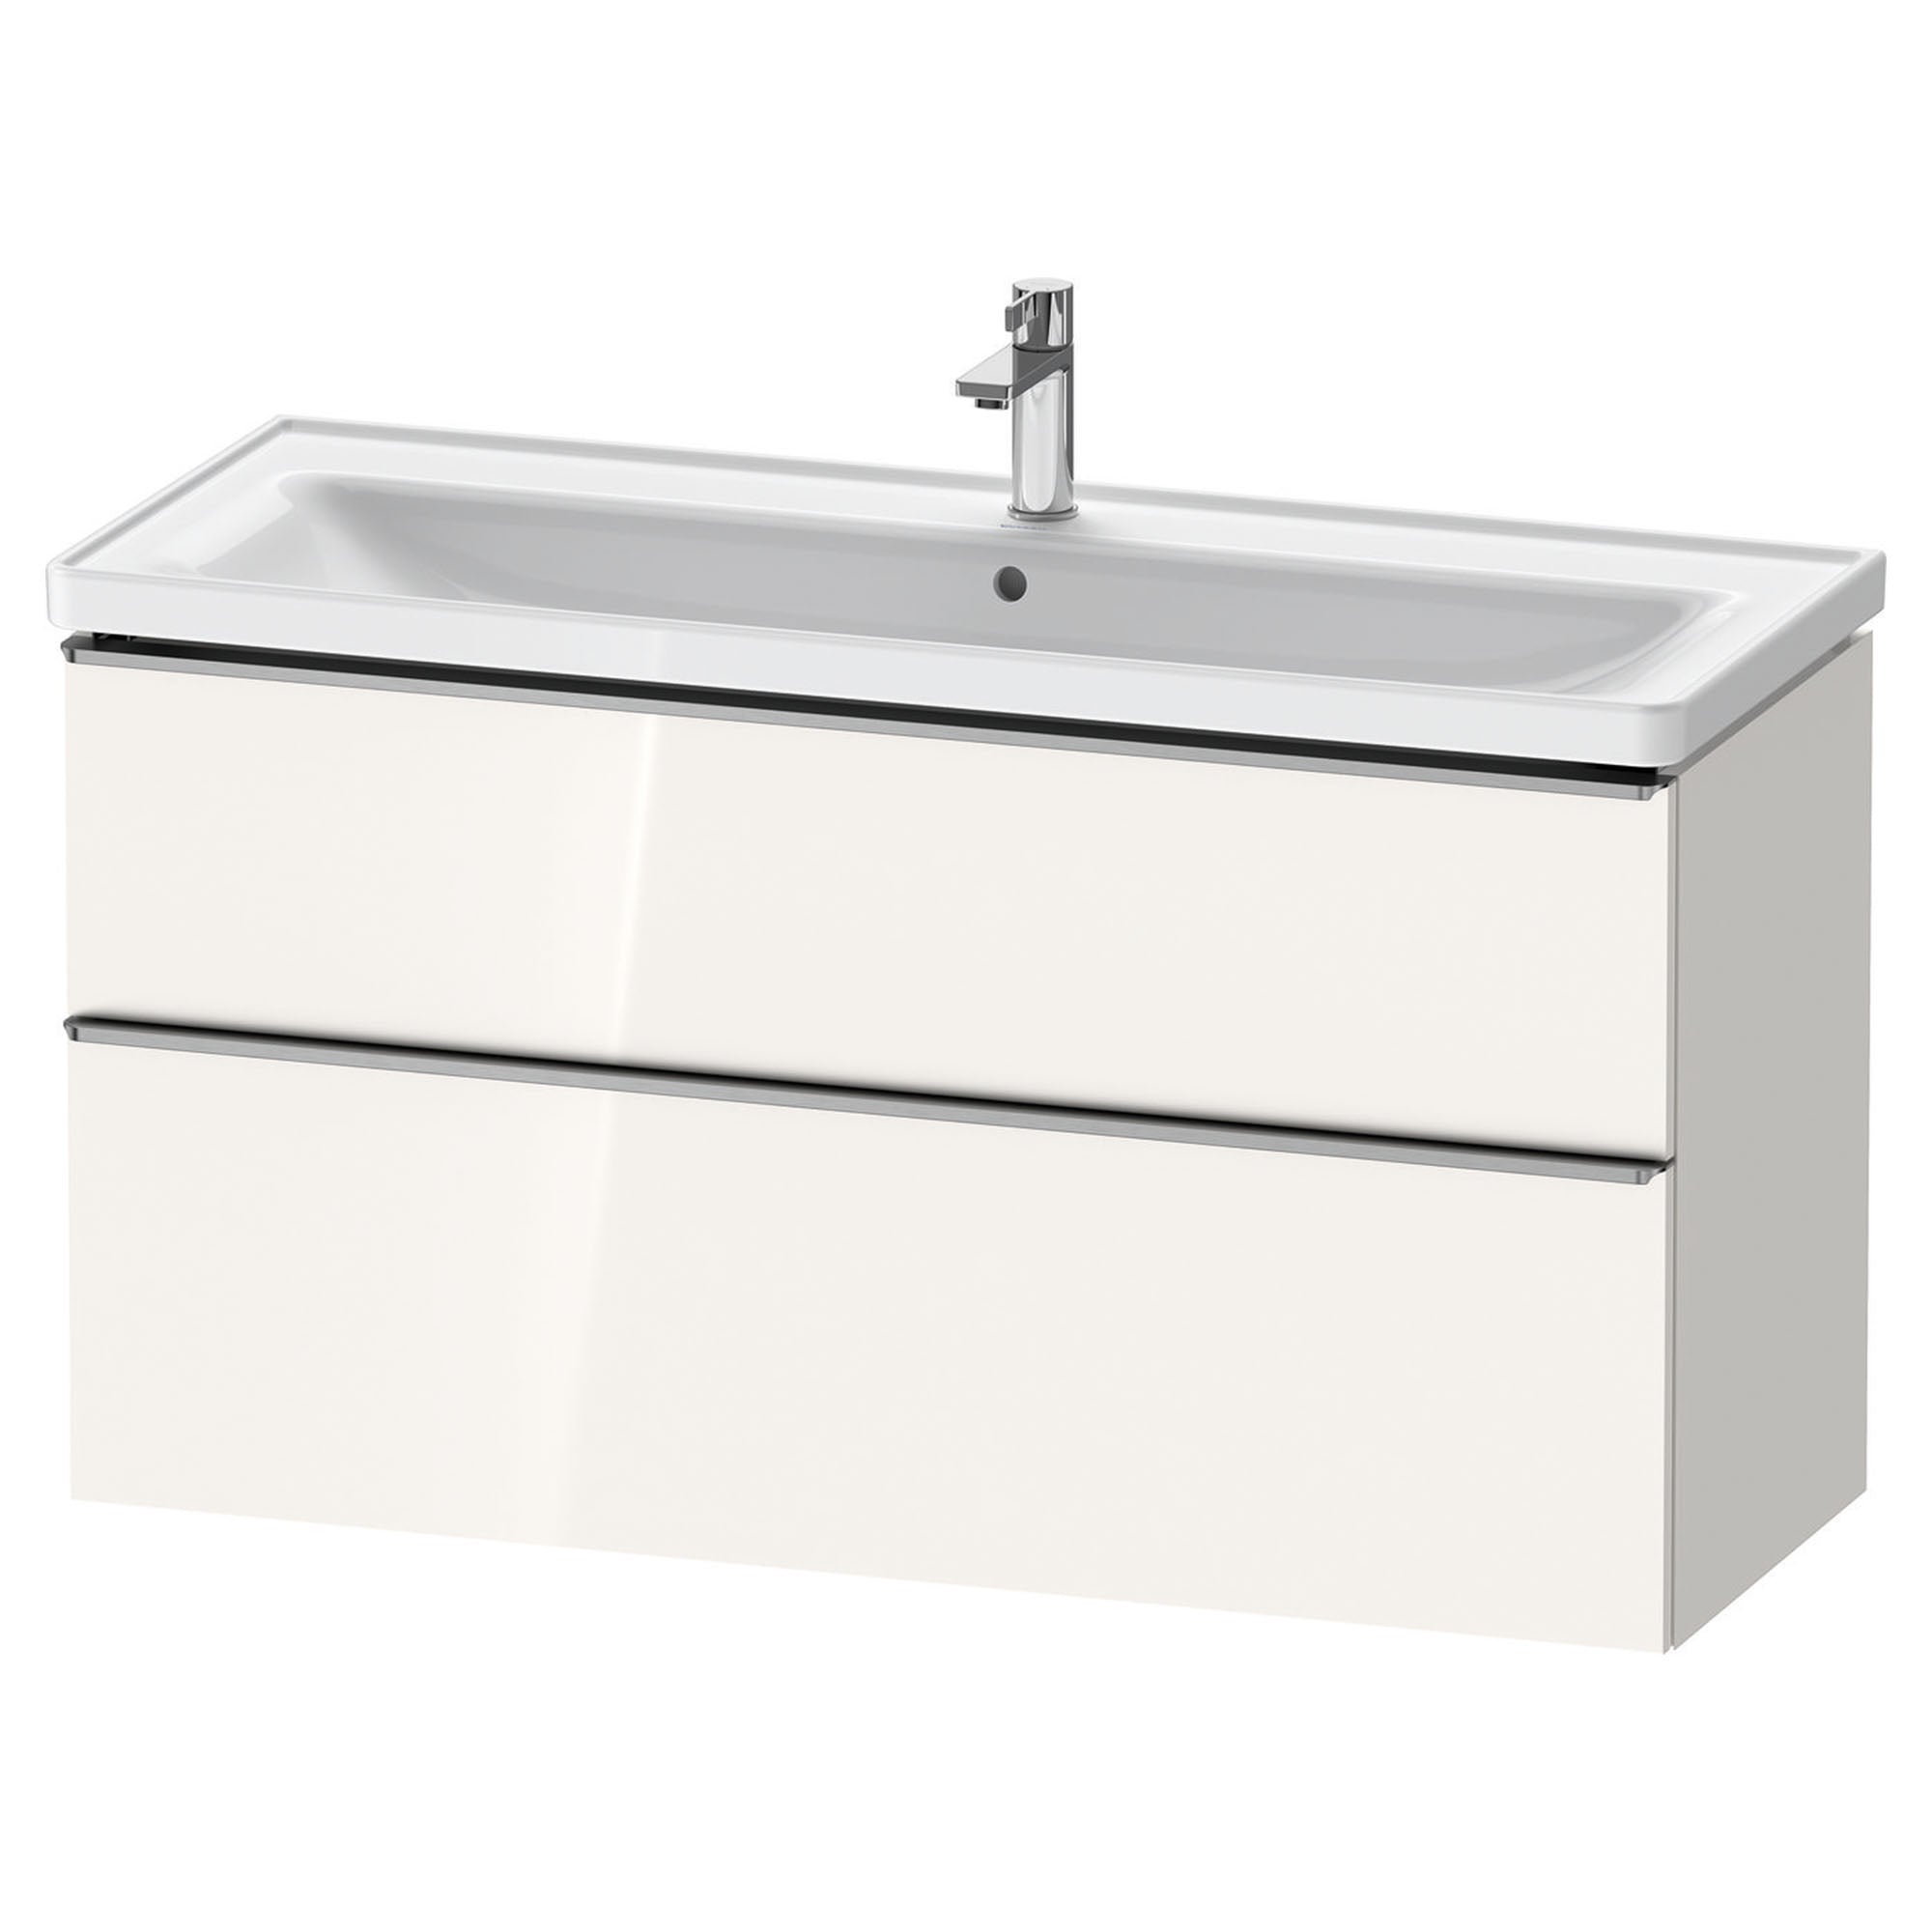 duravit d-neo 1200mm wall mounted vanity unit with d-neo basin gloss white stainless steel handles